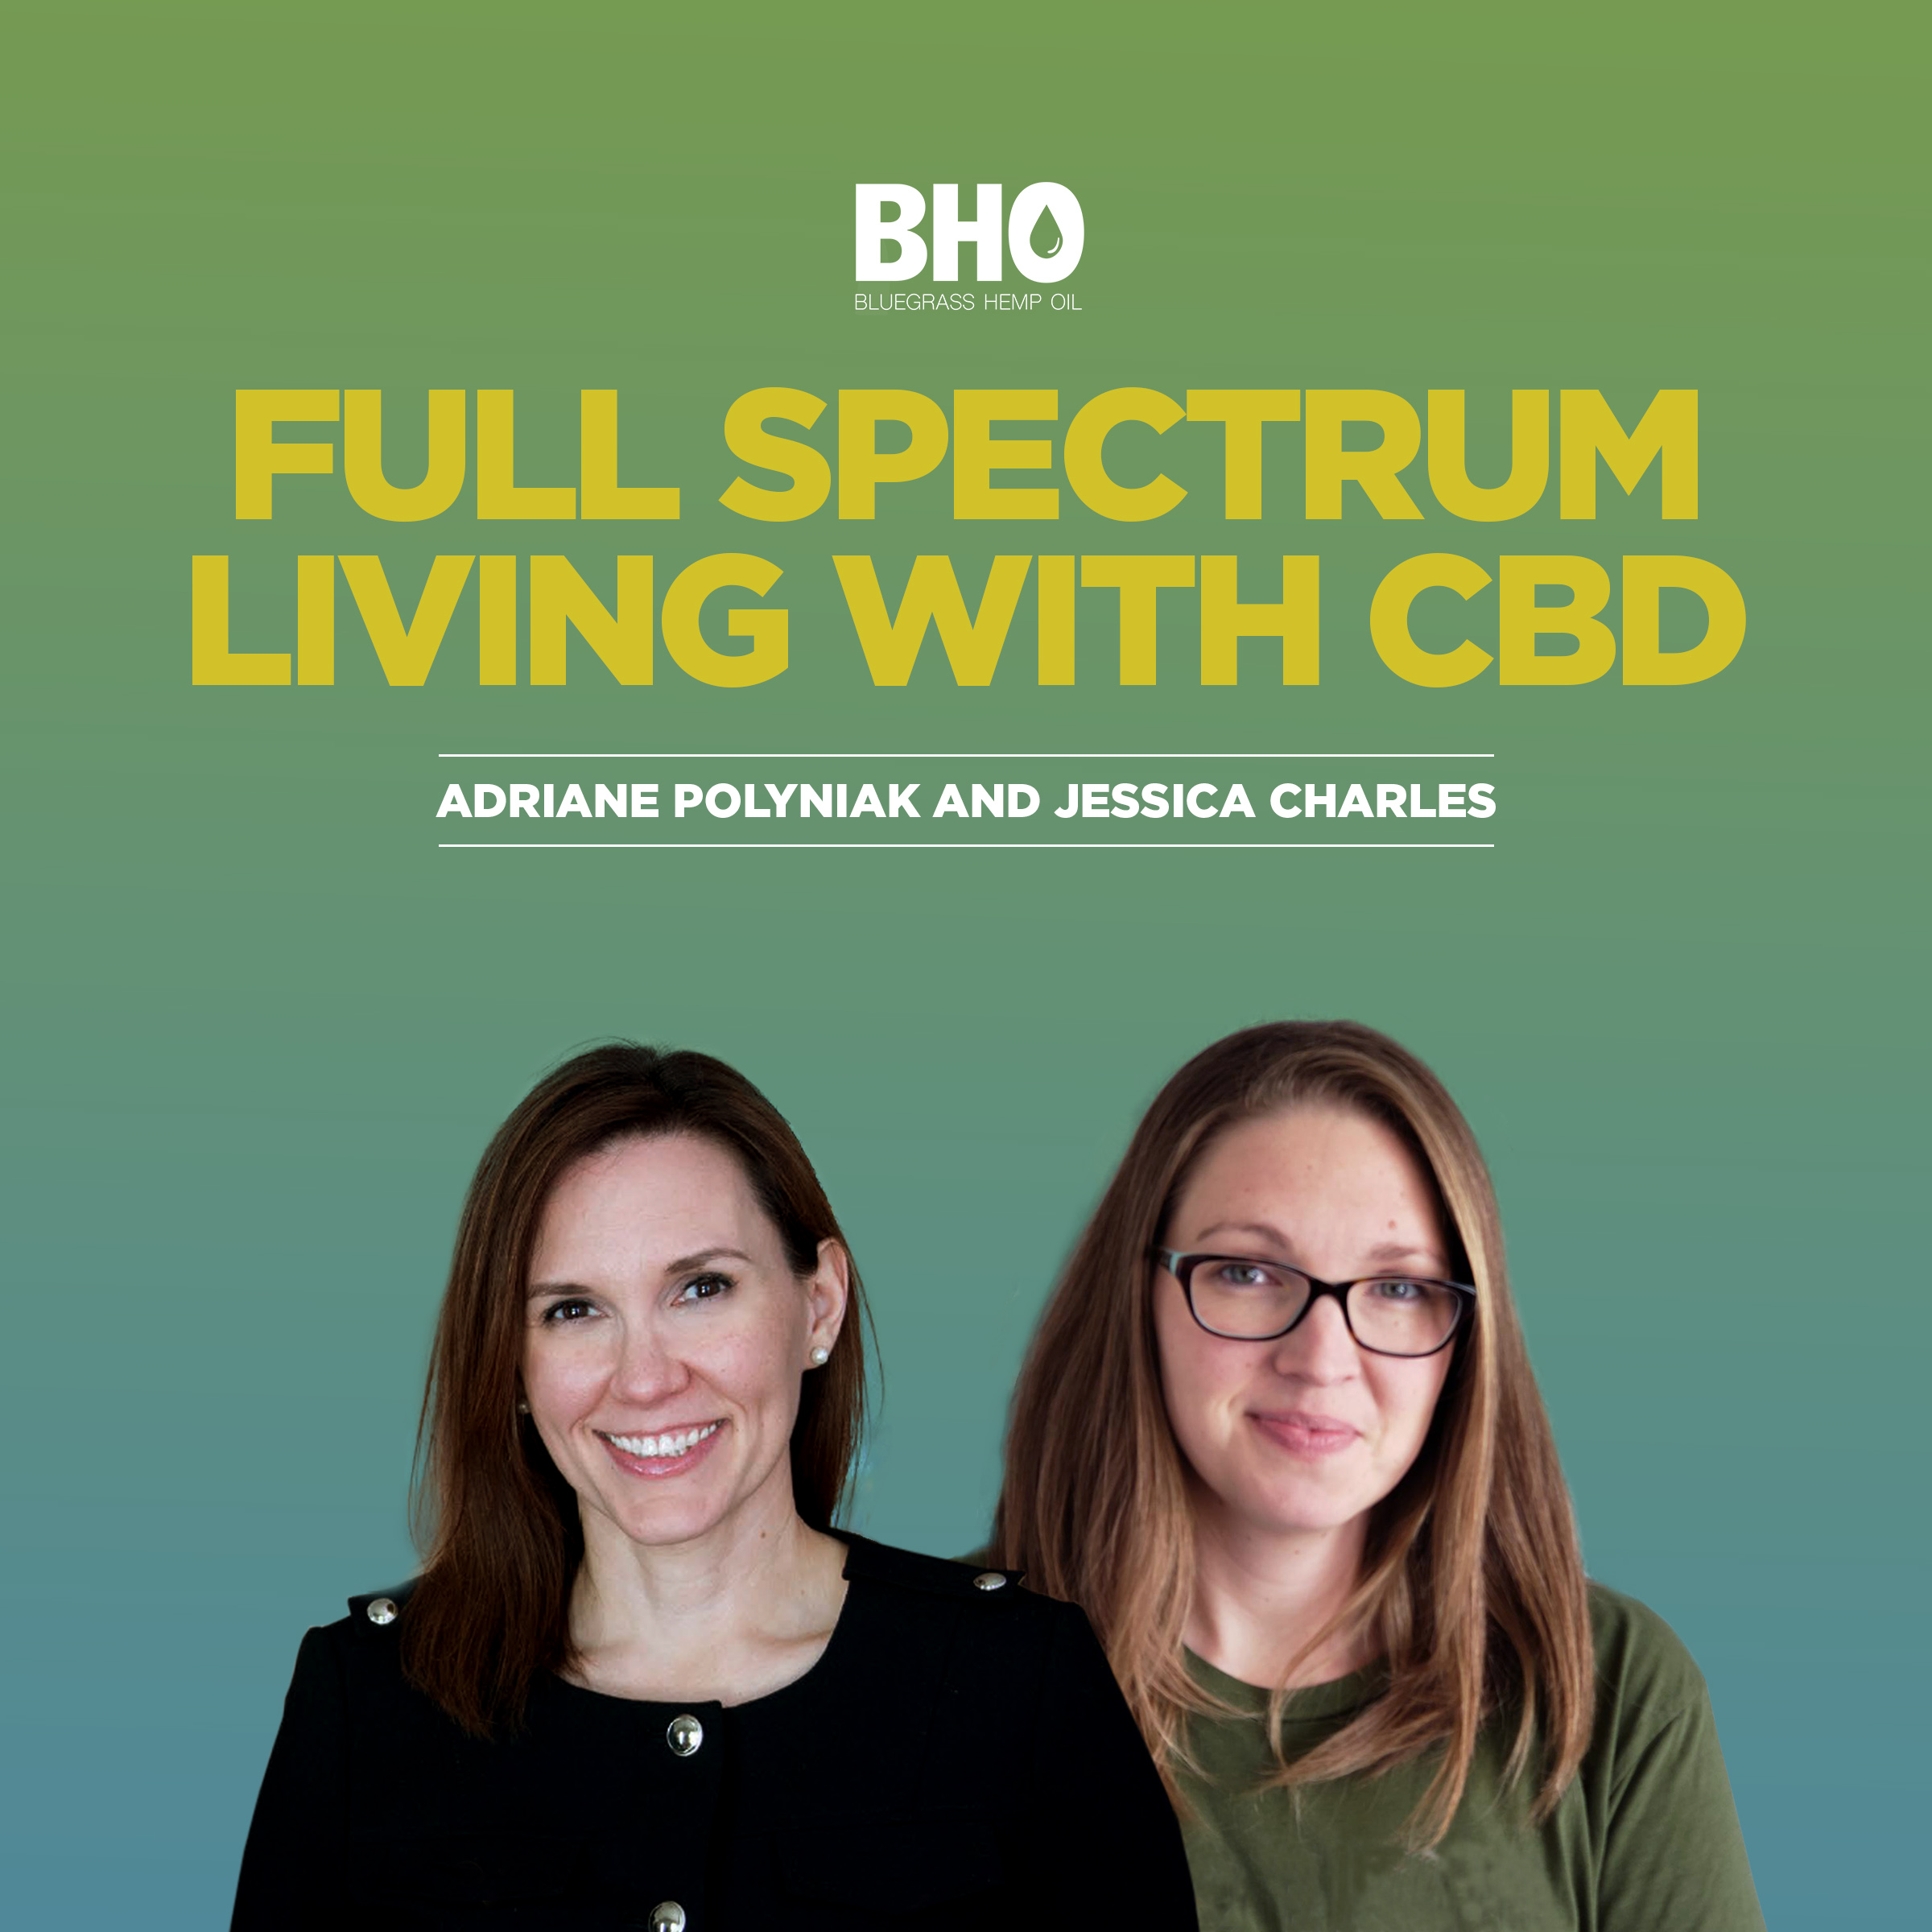 We Launched a CBD Podcast!